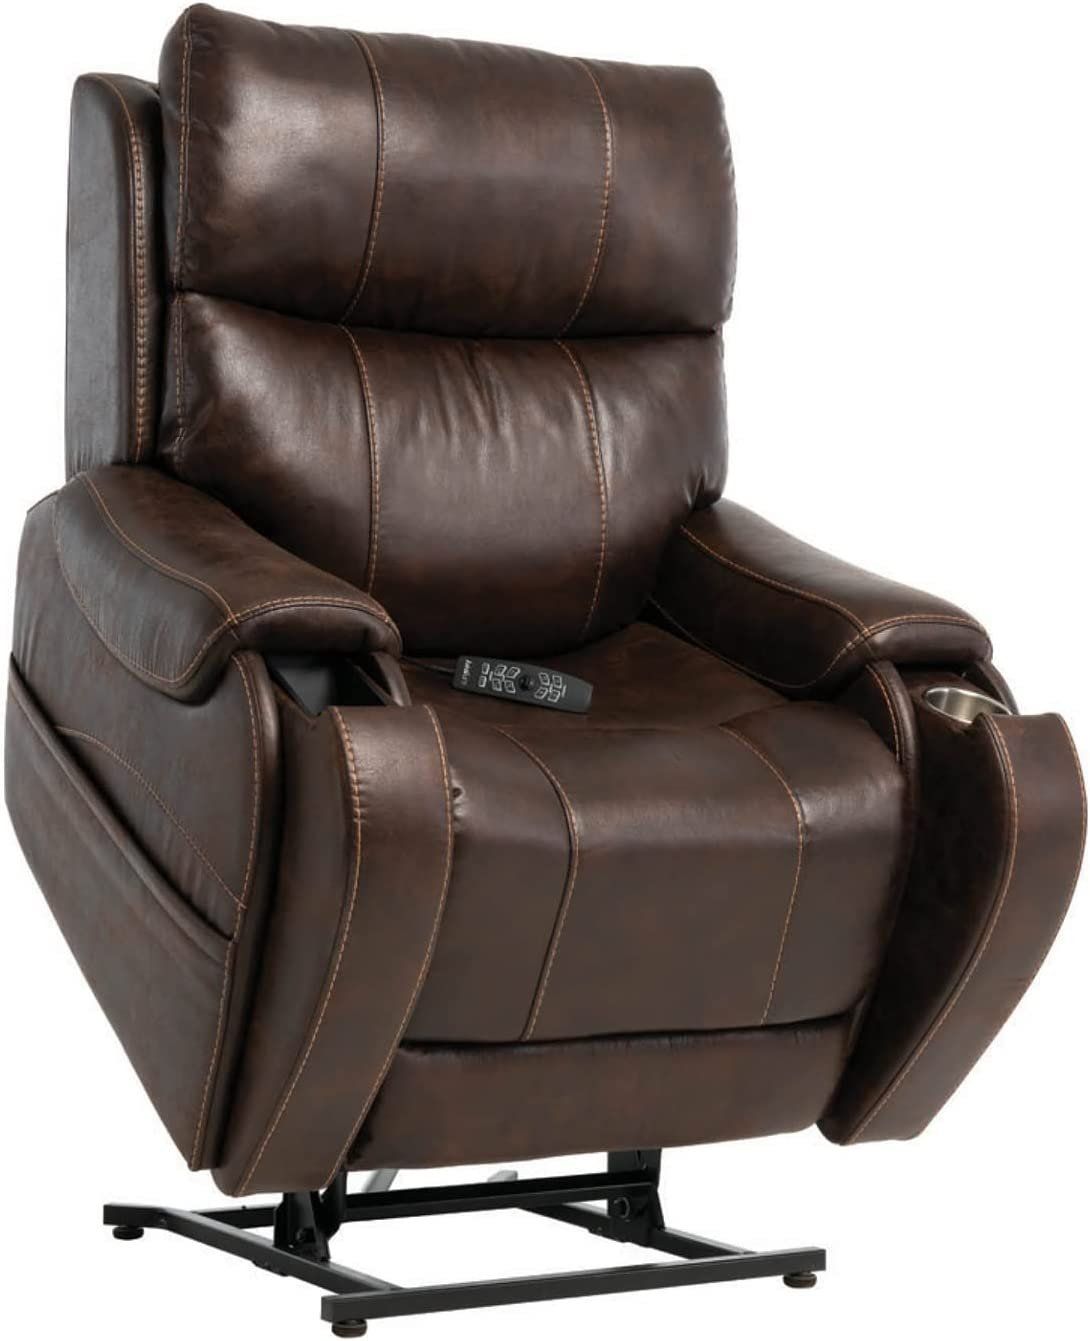 Infinite position lift chair, coil pocketed springs in seat, fully padded chaise, standard lumbar pillow in matching fabric.